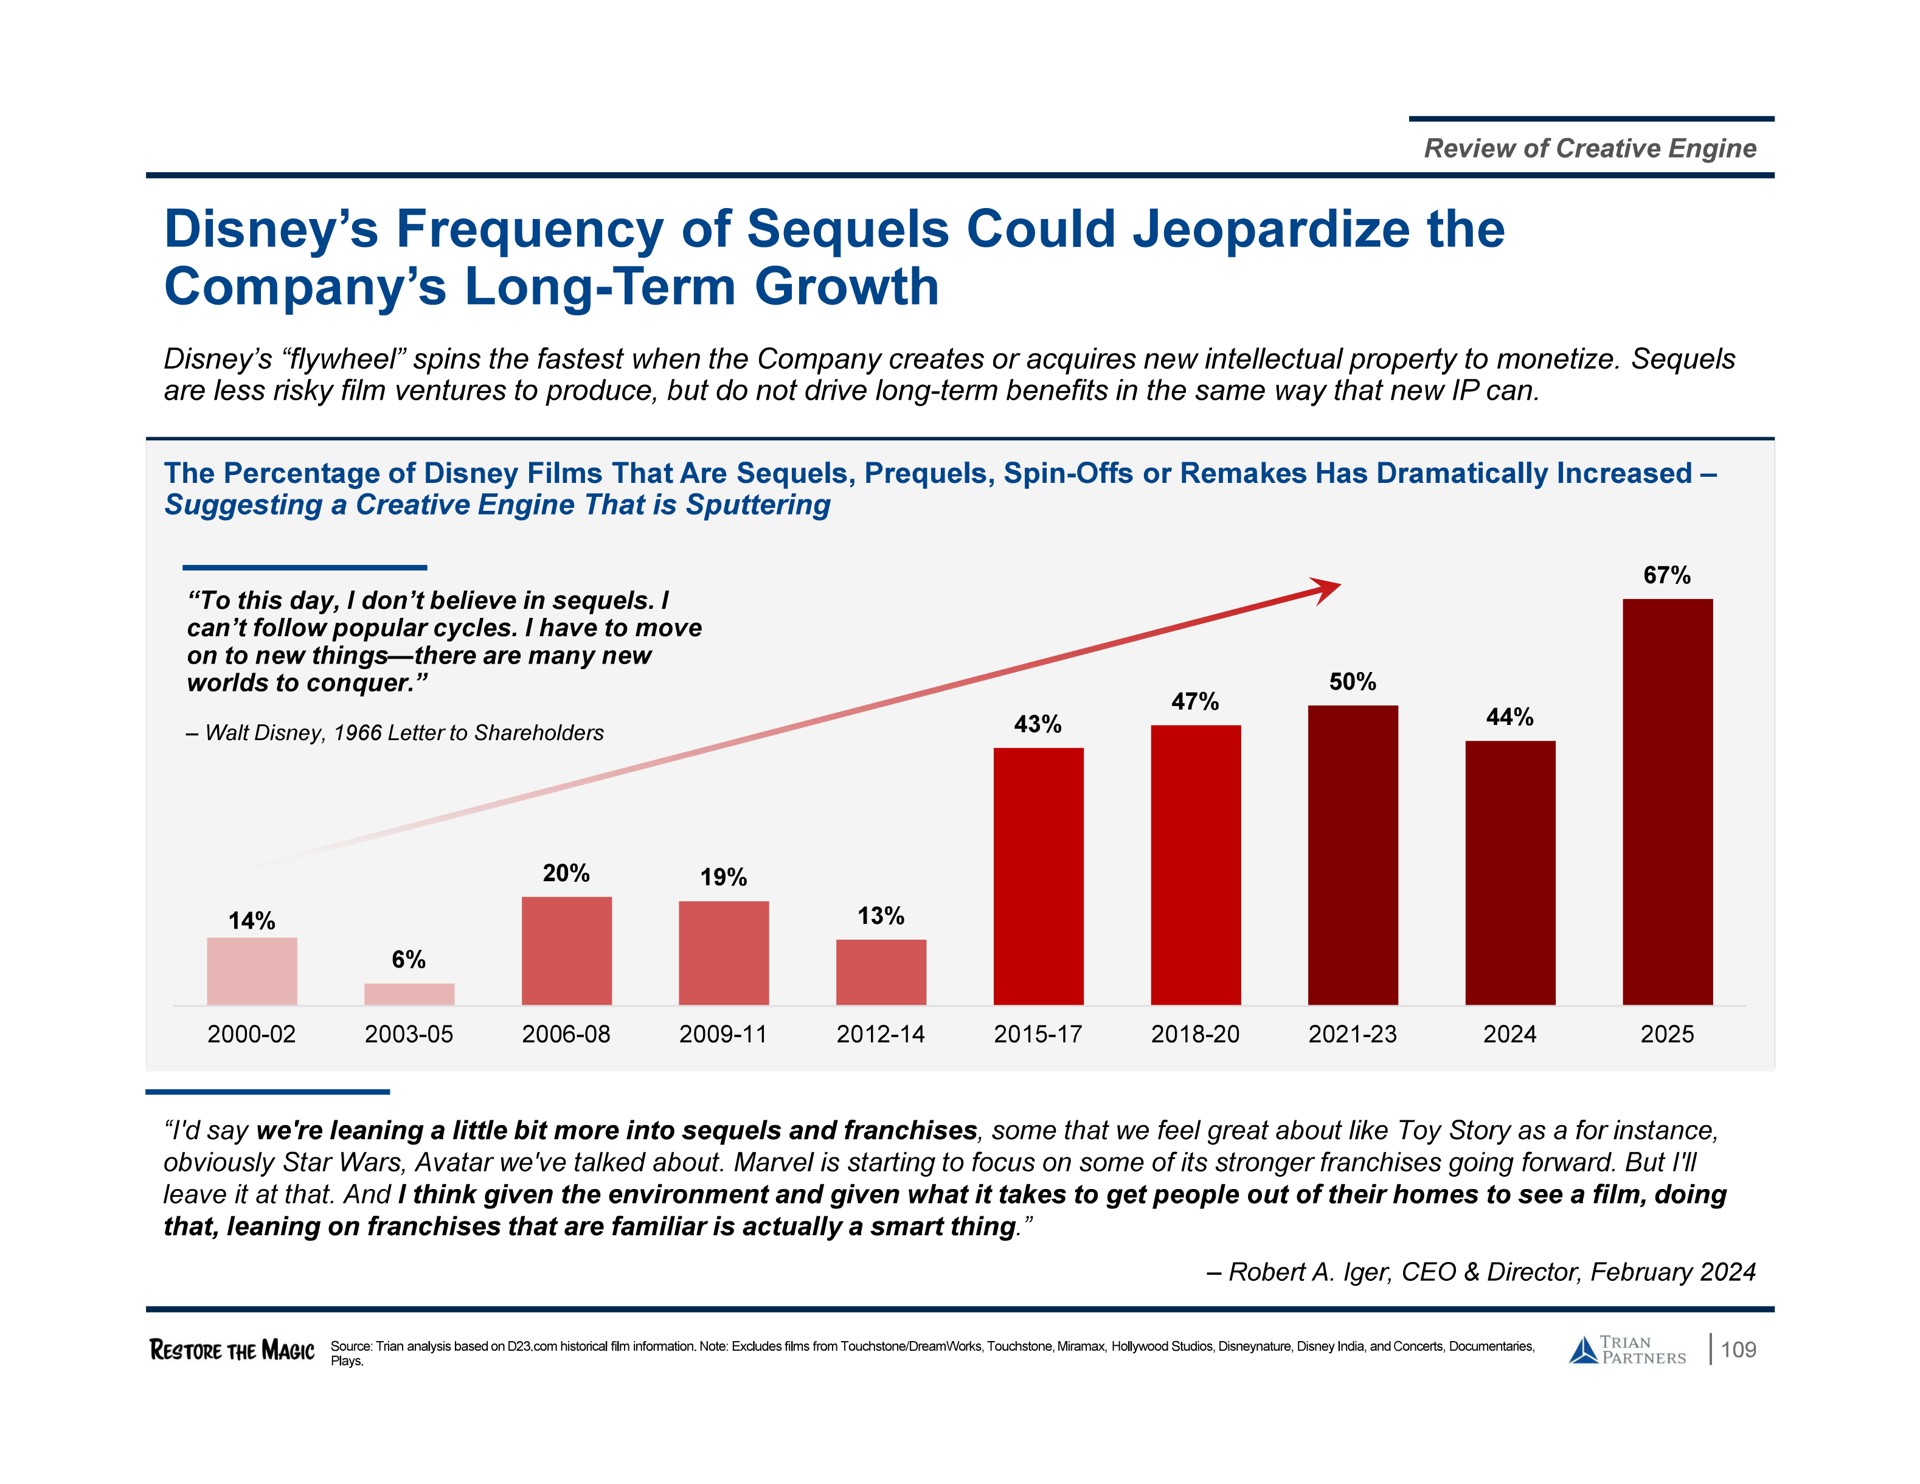 frequency of sequels could jeopardize the company long term growth | Trian Partners